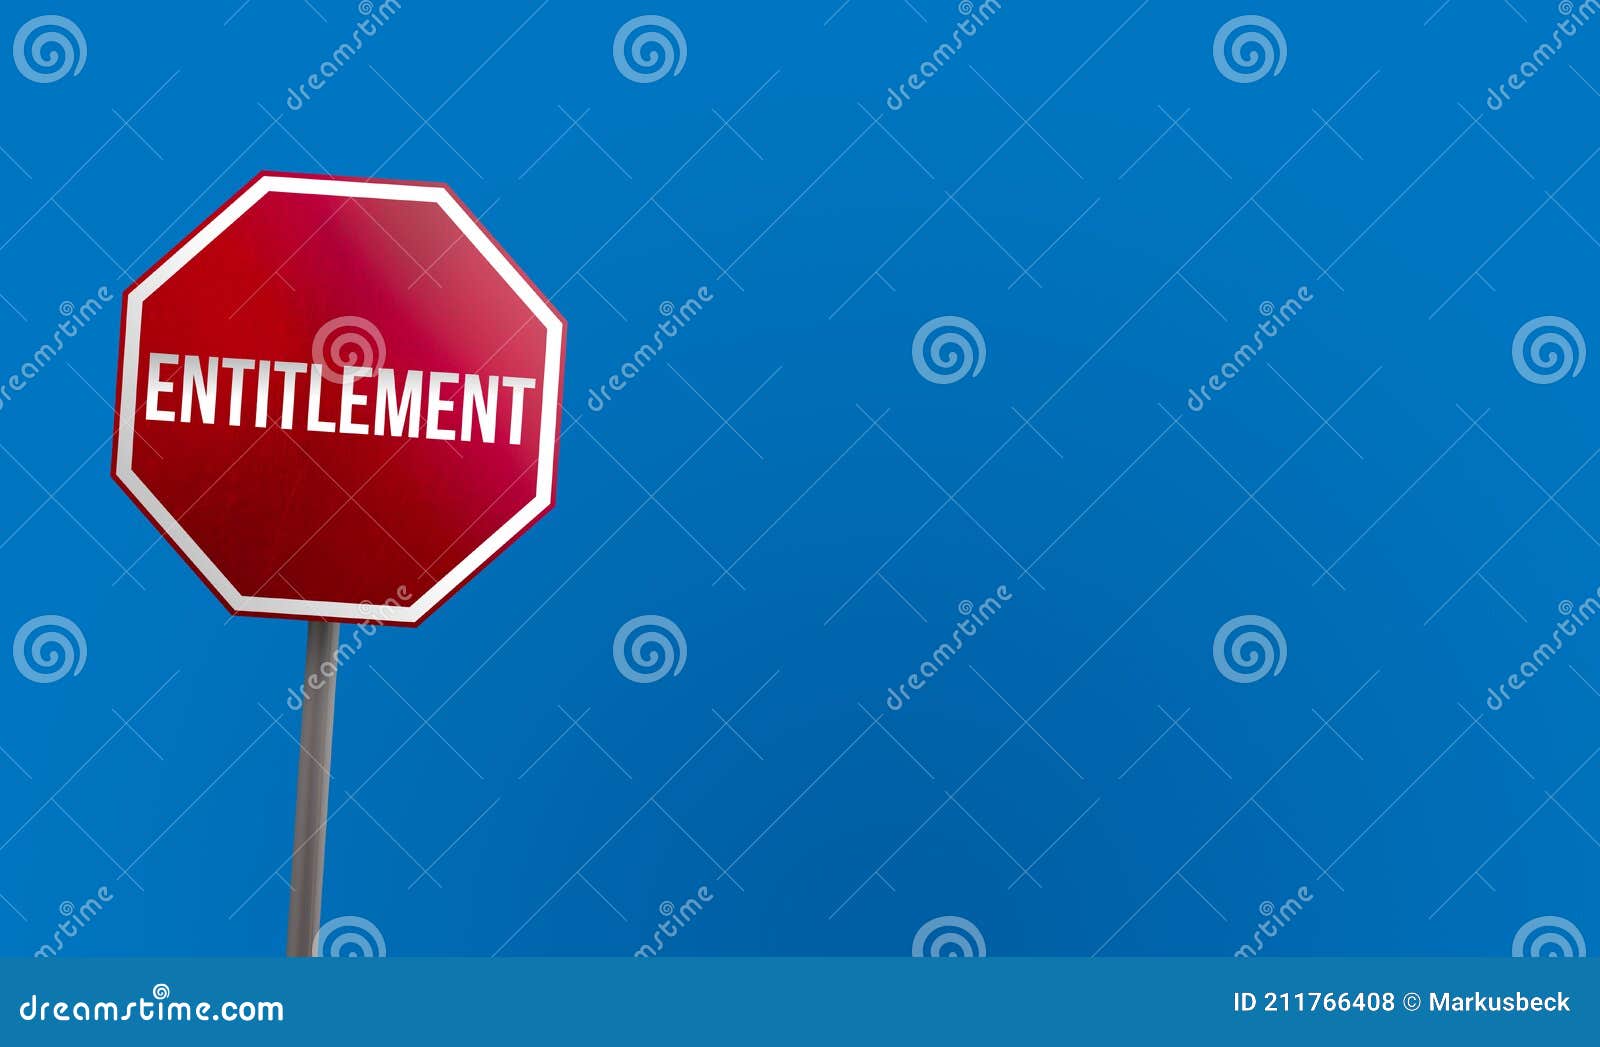 entitlement - red sign with blue sky